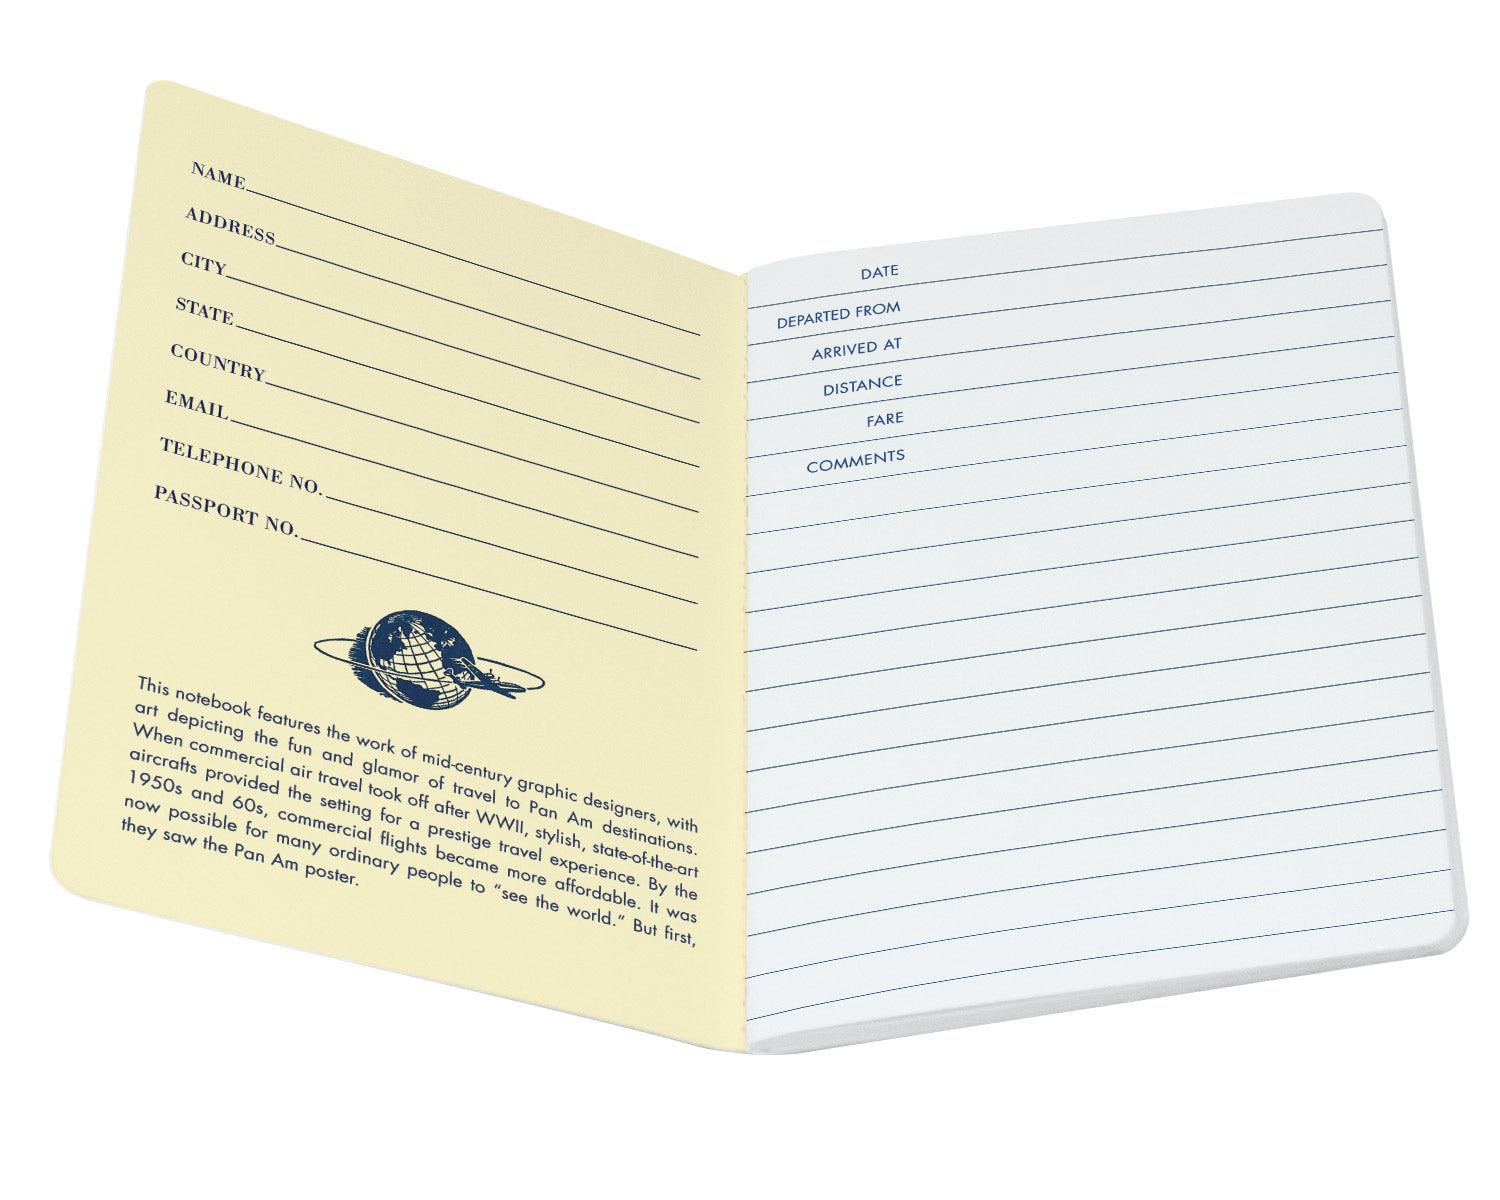 Product photo of Pan Am Hong Kong Notebook, a novelty gift manufactured by The Unemployed Philosophers Guild.